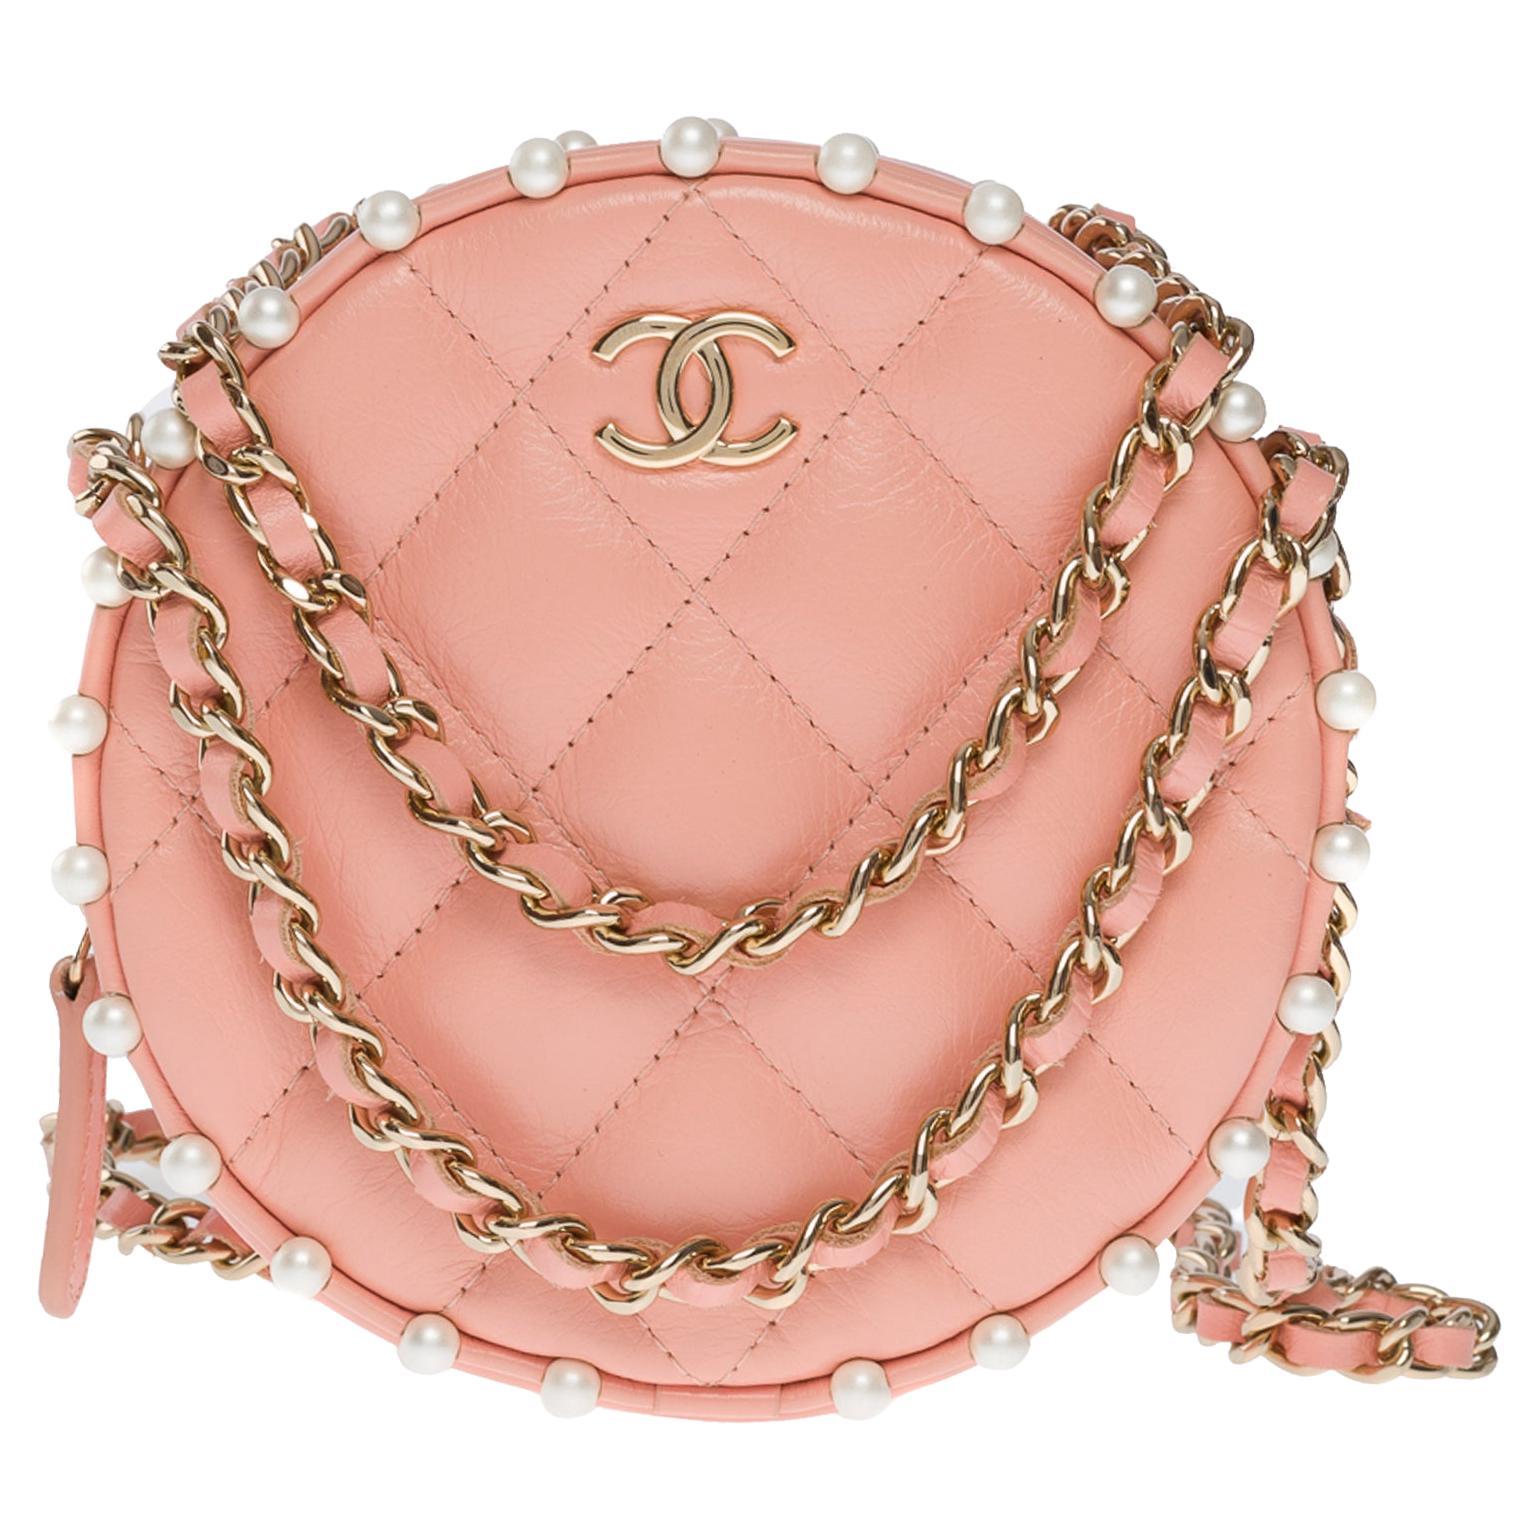 New- Amazing Chanel "Round On Earth" shoulder bag in Pink quilted leather, SHW